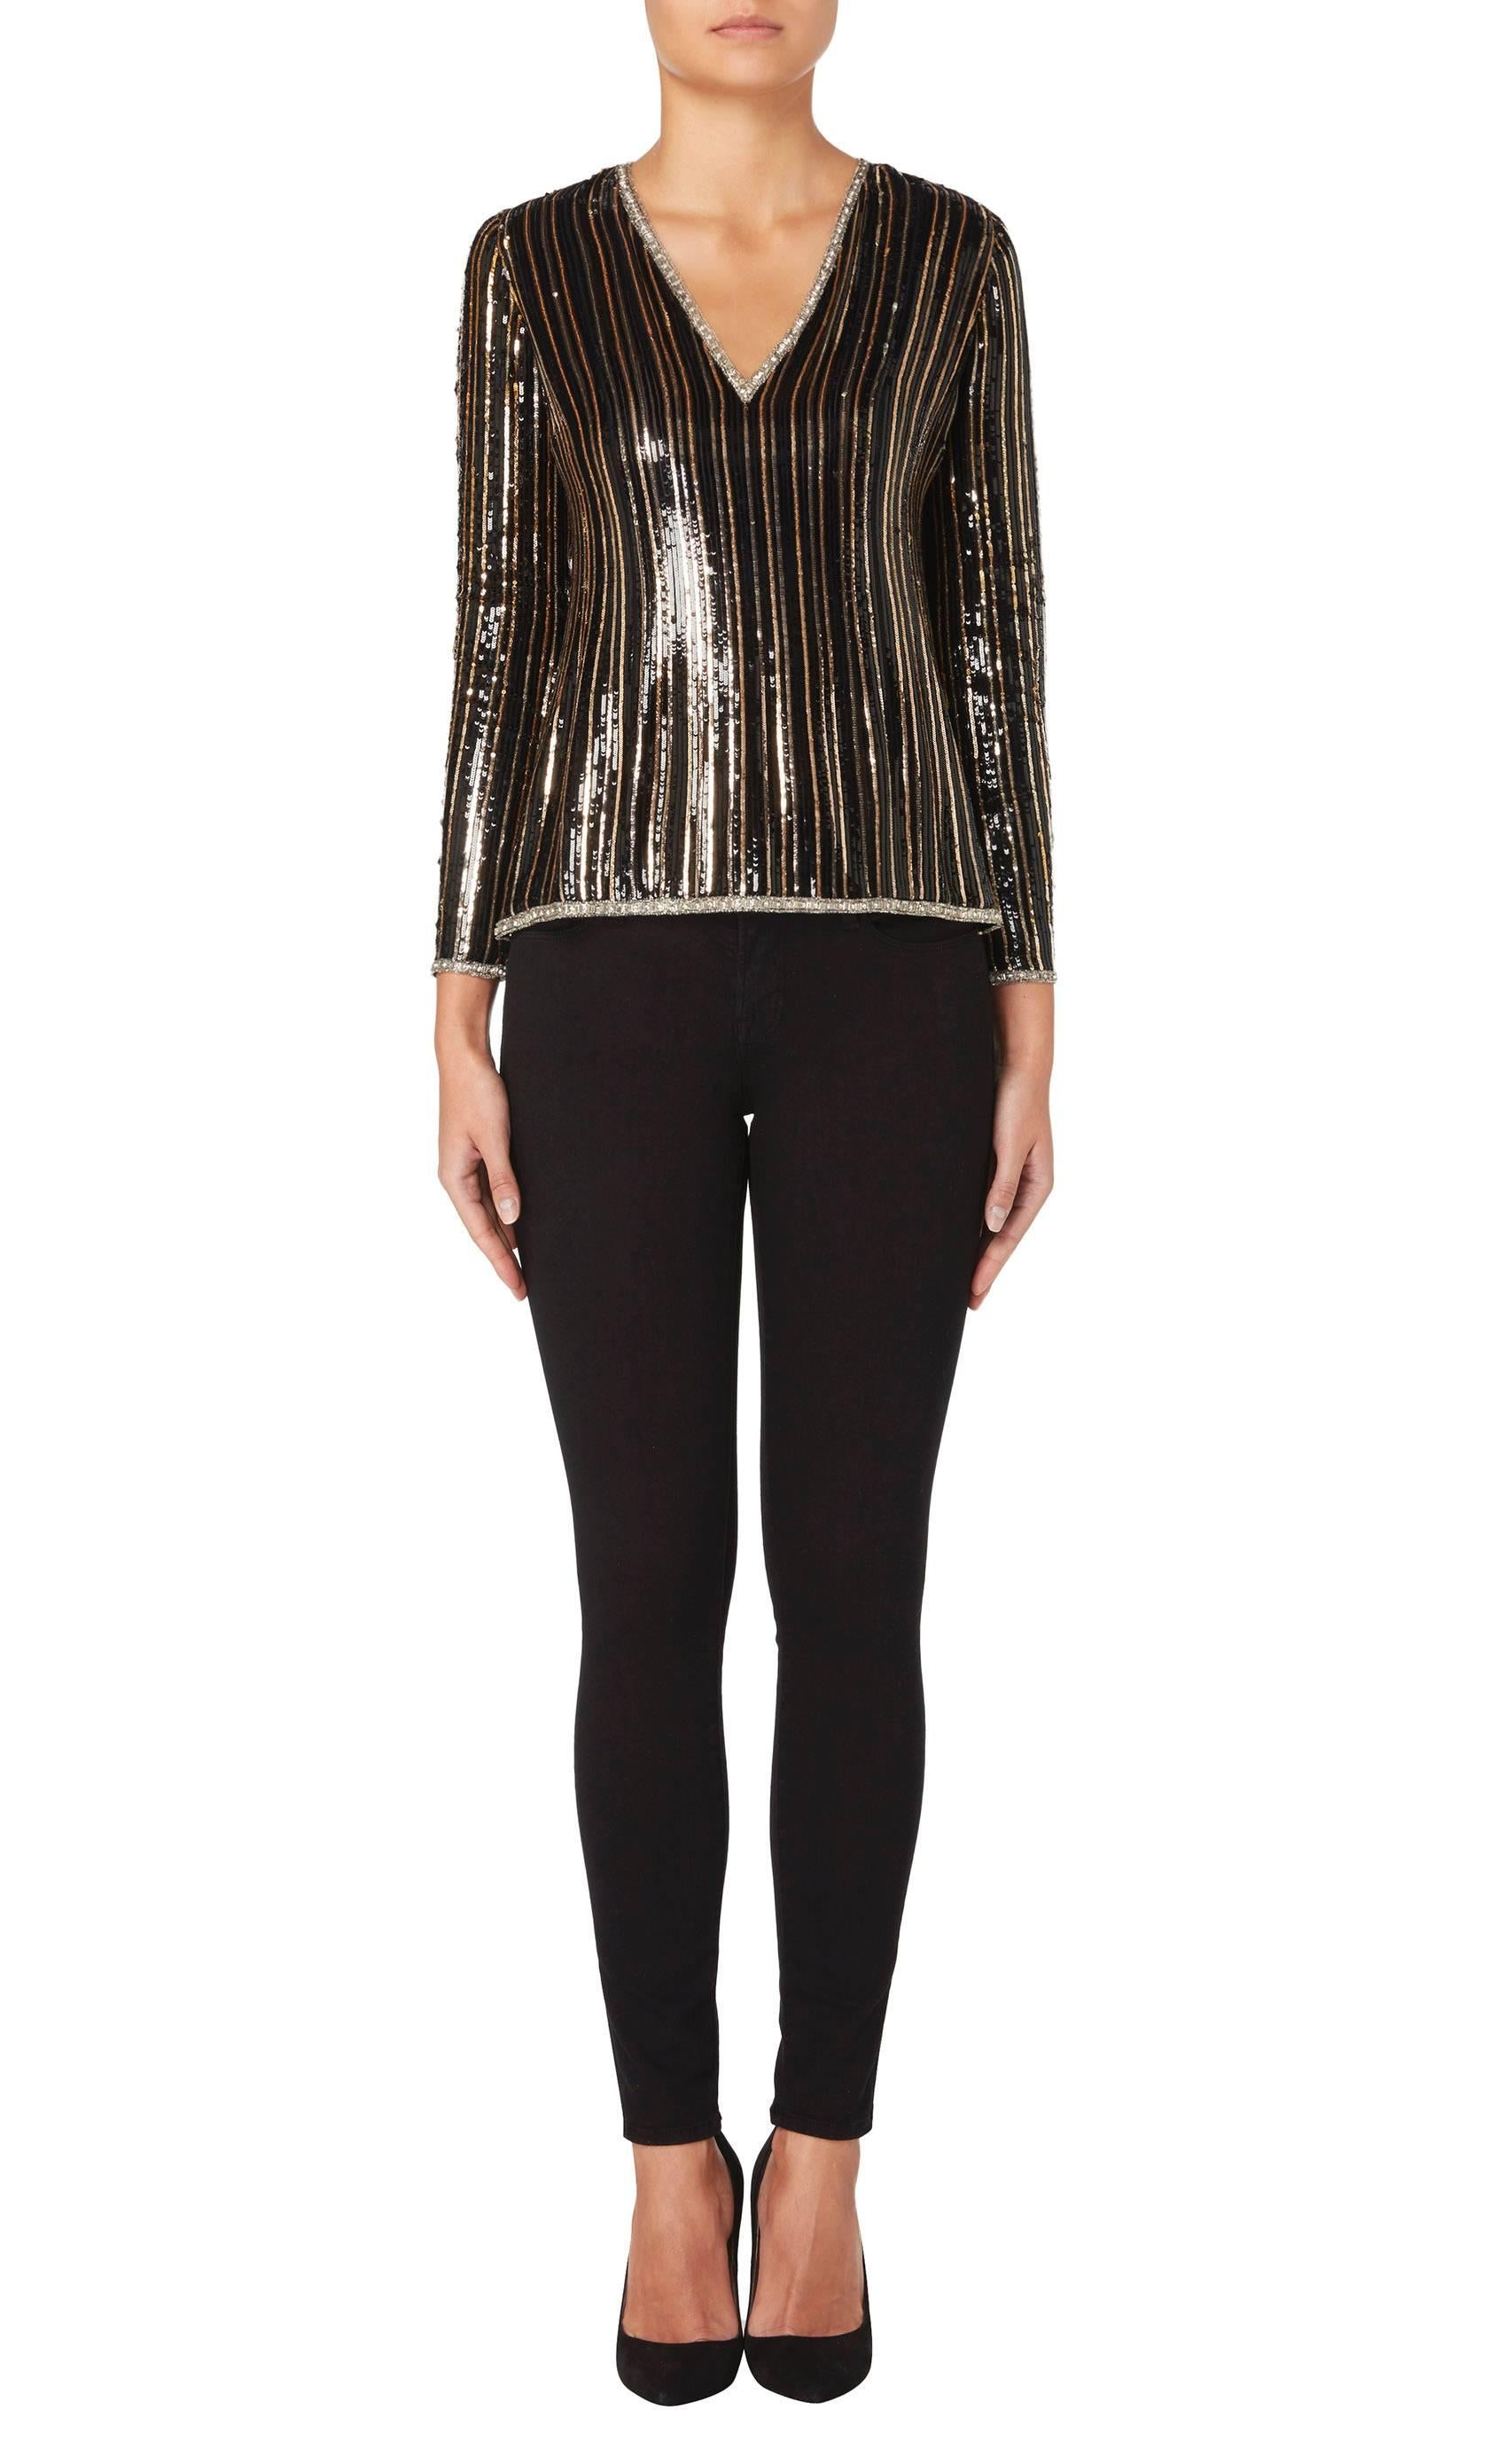 This shimmering Yves Saint Laurent haute couture top is made from black silk chiffon and embellished with scores of black, silver and gold sequins in vertical stripes, while crystal embellishment on the v-neckline, hem and cuffs adds to the